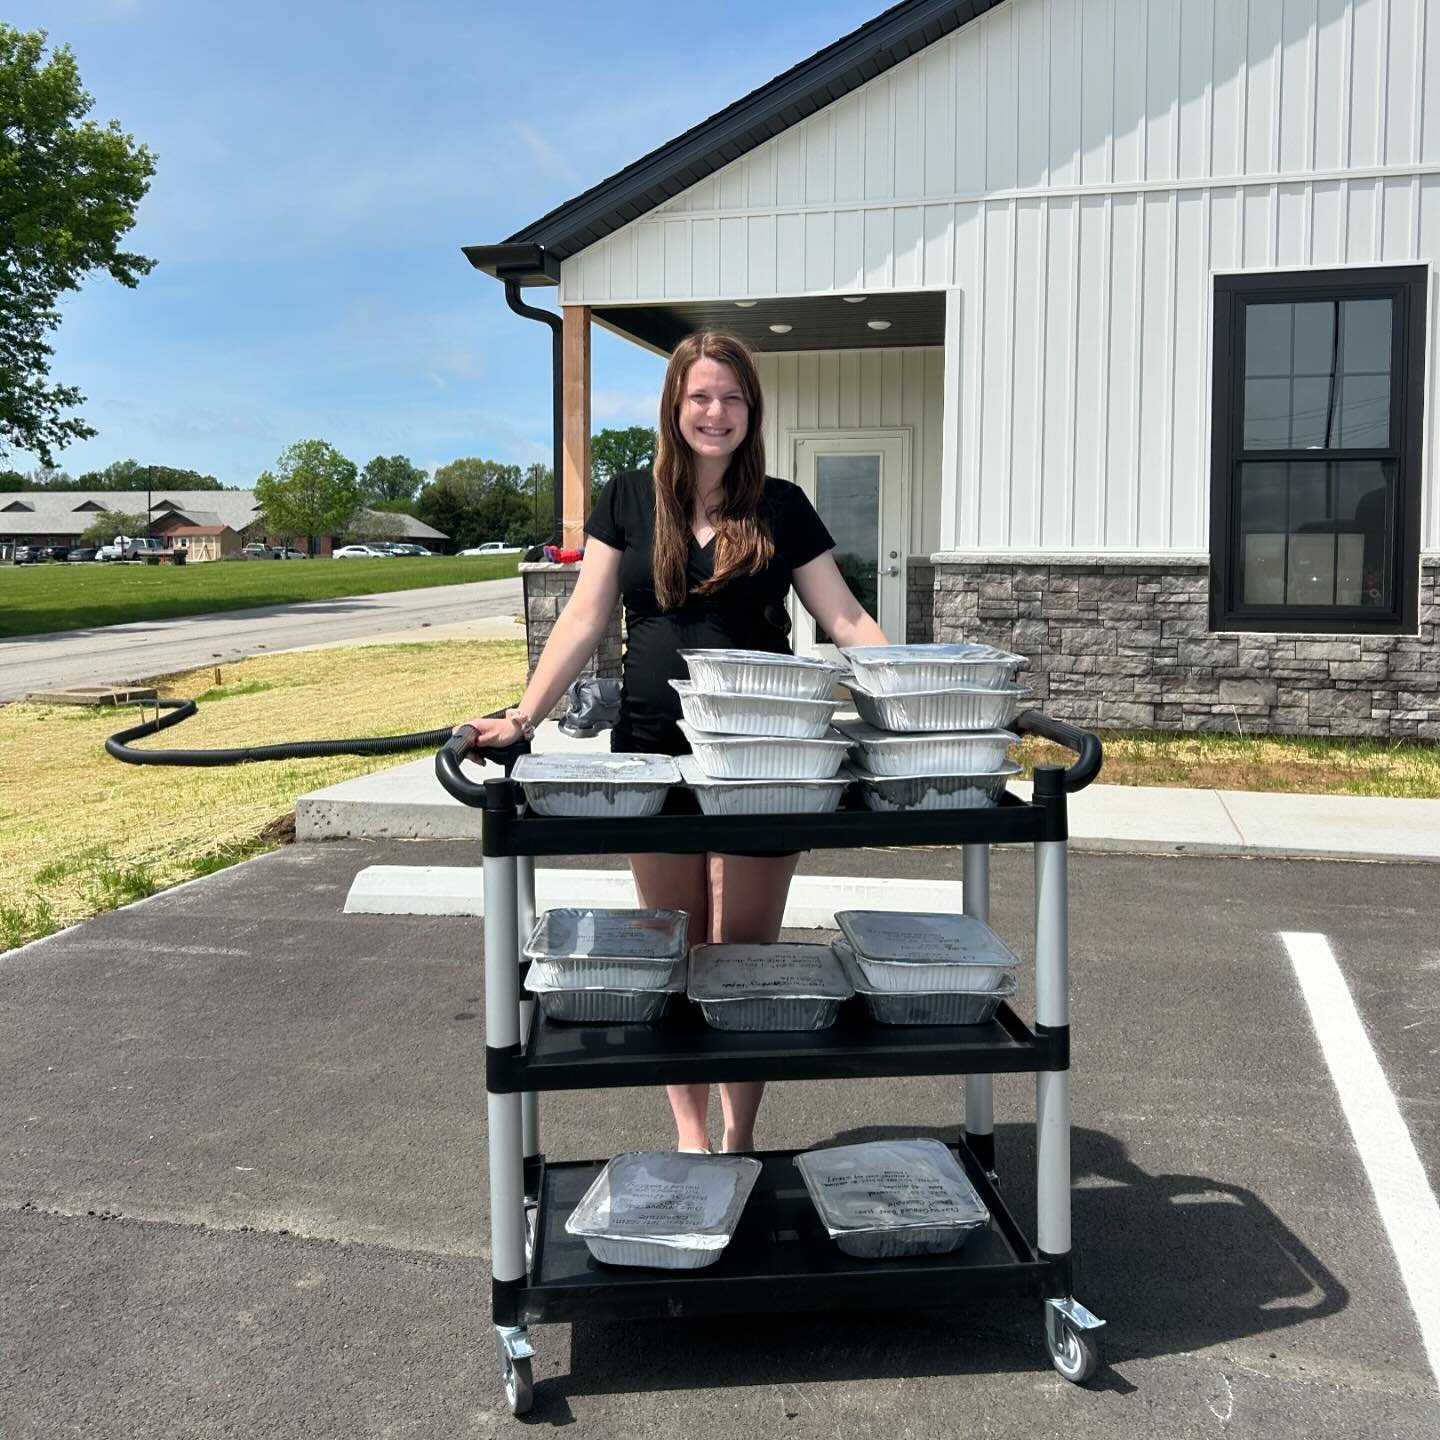 We are incredibly grateful for the generosity of Troy First Baptist Church @troyfirstbc 
This past Sunday, their volunteers went above and beyond, whipping up a delicious spread of 16 casseroles for our clients. These meals will surely bring nourishm